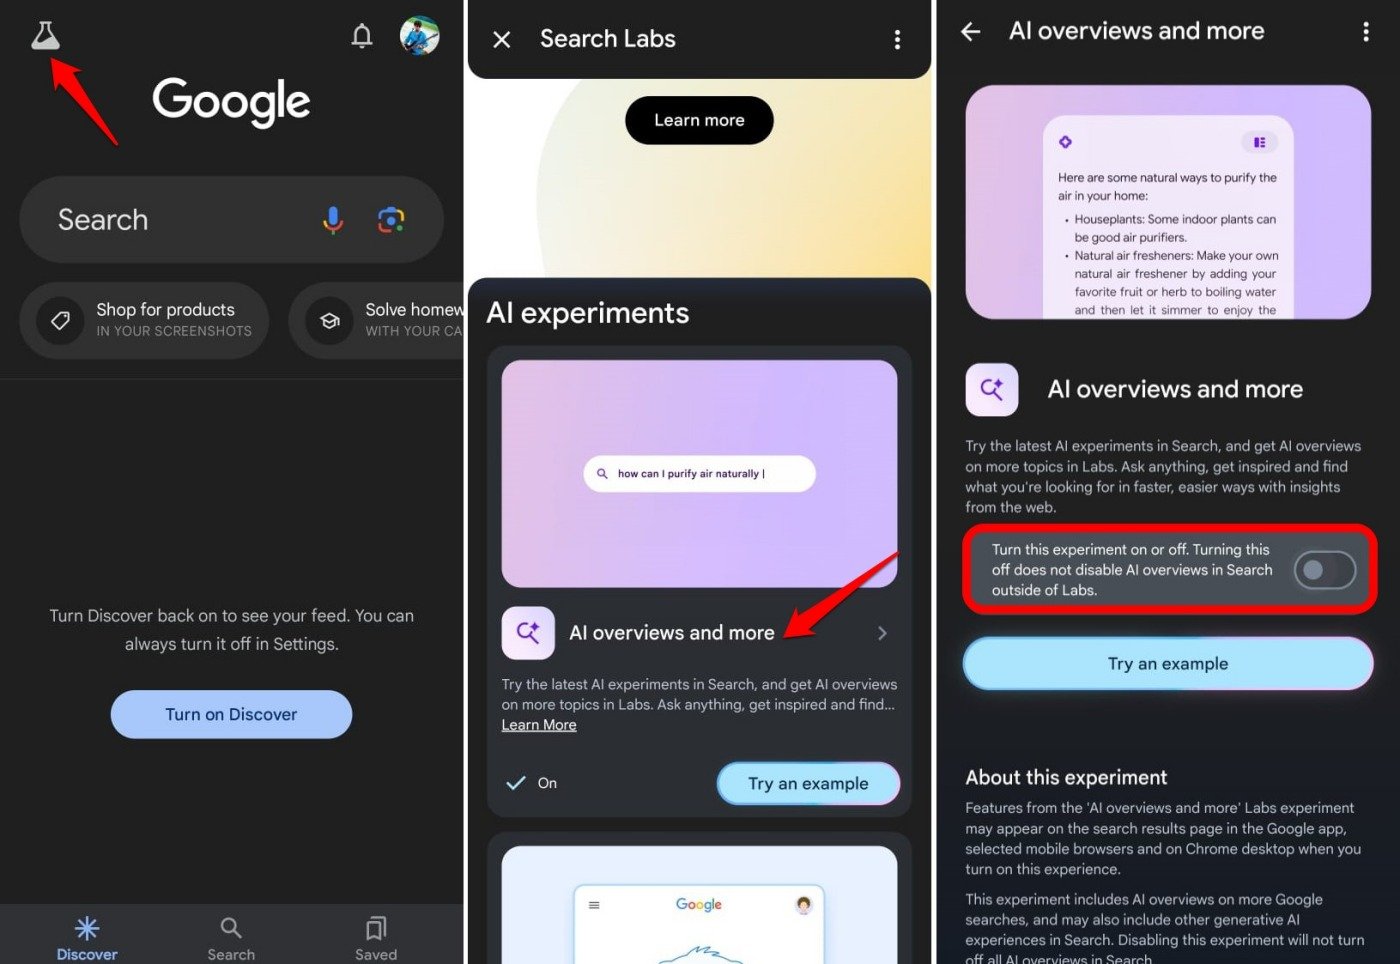 how to disable Google search AI Overview